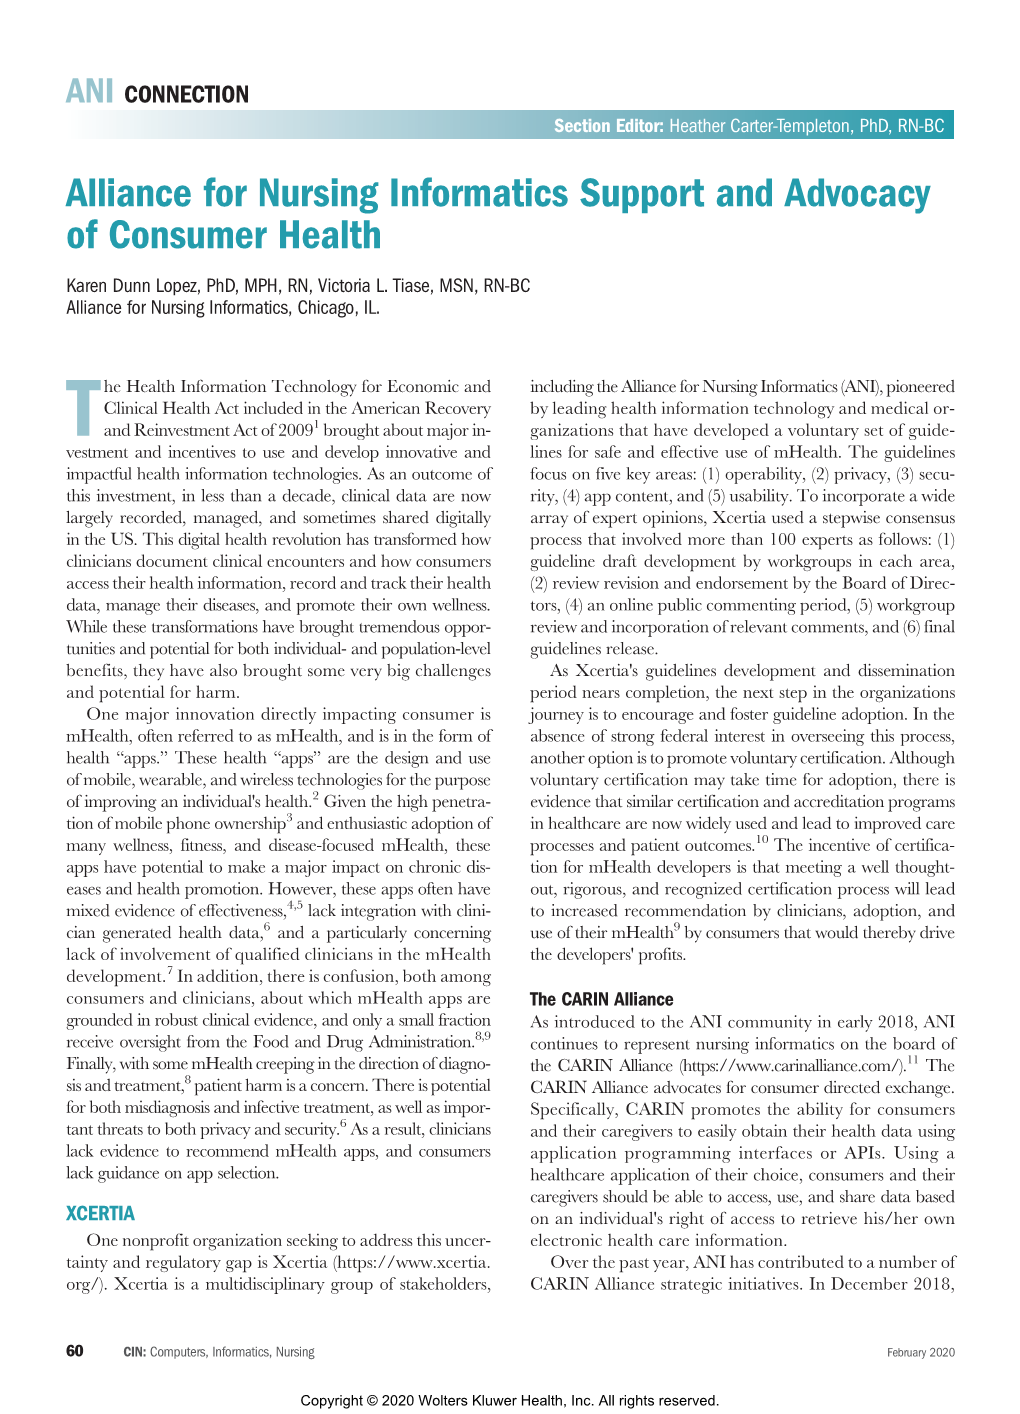 Alliance for Nursing Informatics Support and Advocacy of Consumer Health